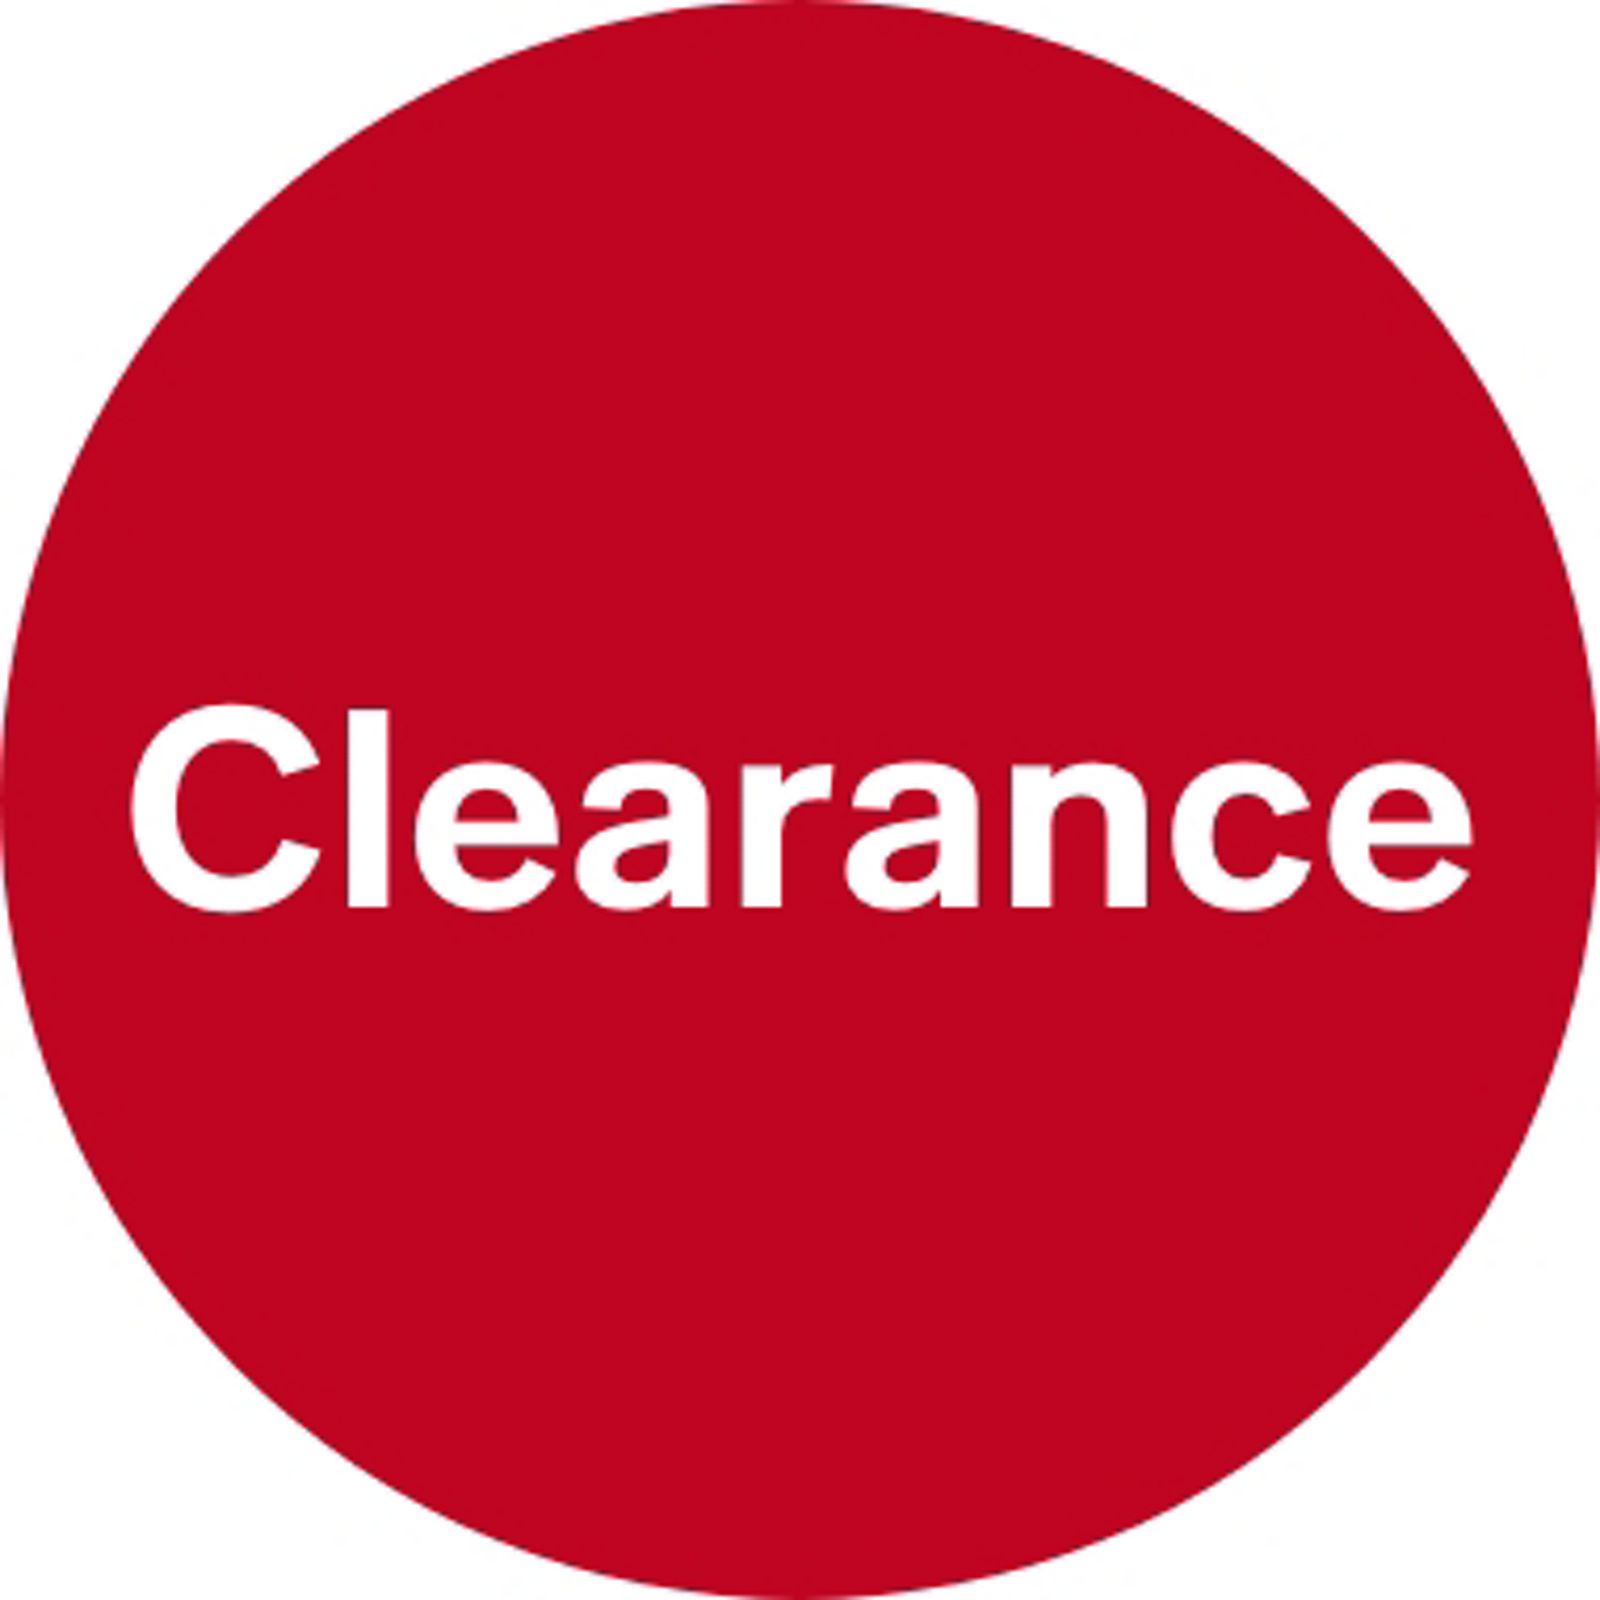 Home Fragrance Home Products & Furnishings Sale, Clearance & Closeout Deals  - Macy's